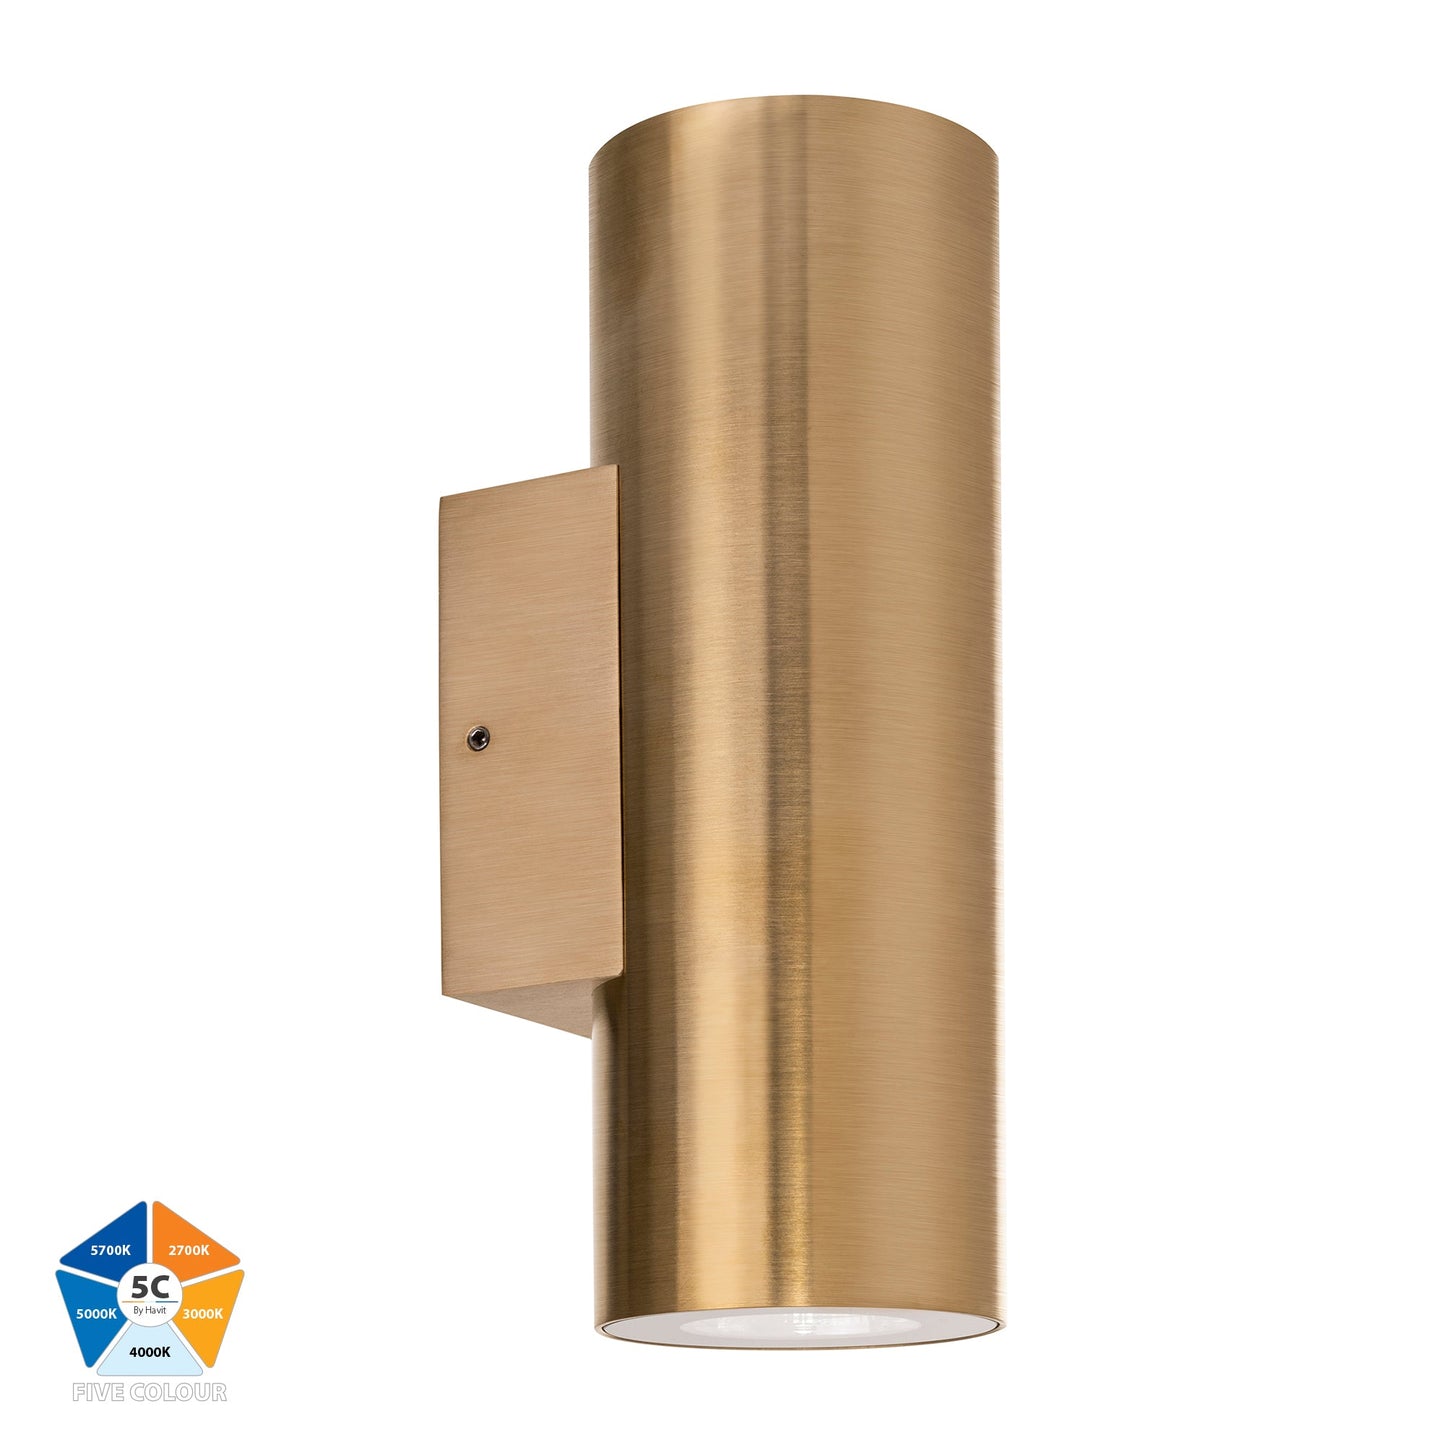 Solid Brass Up & Down Wall Light 